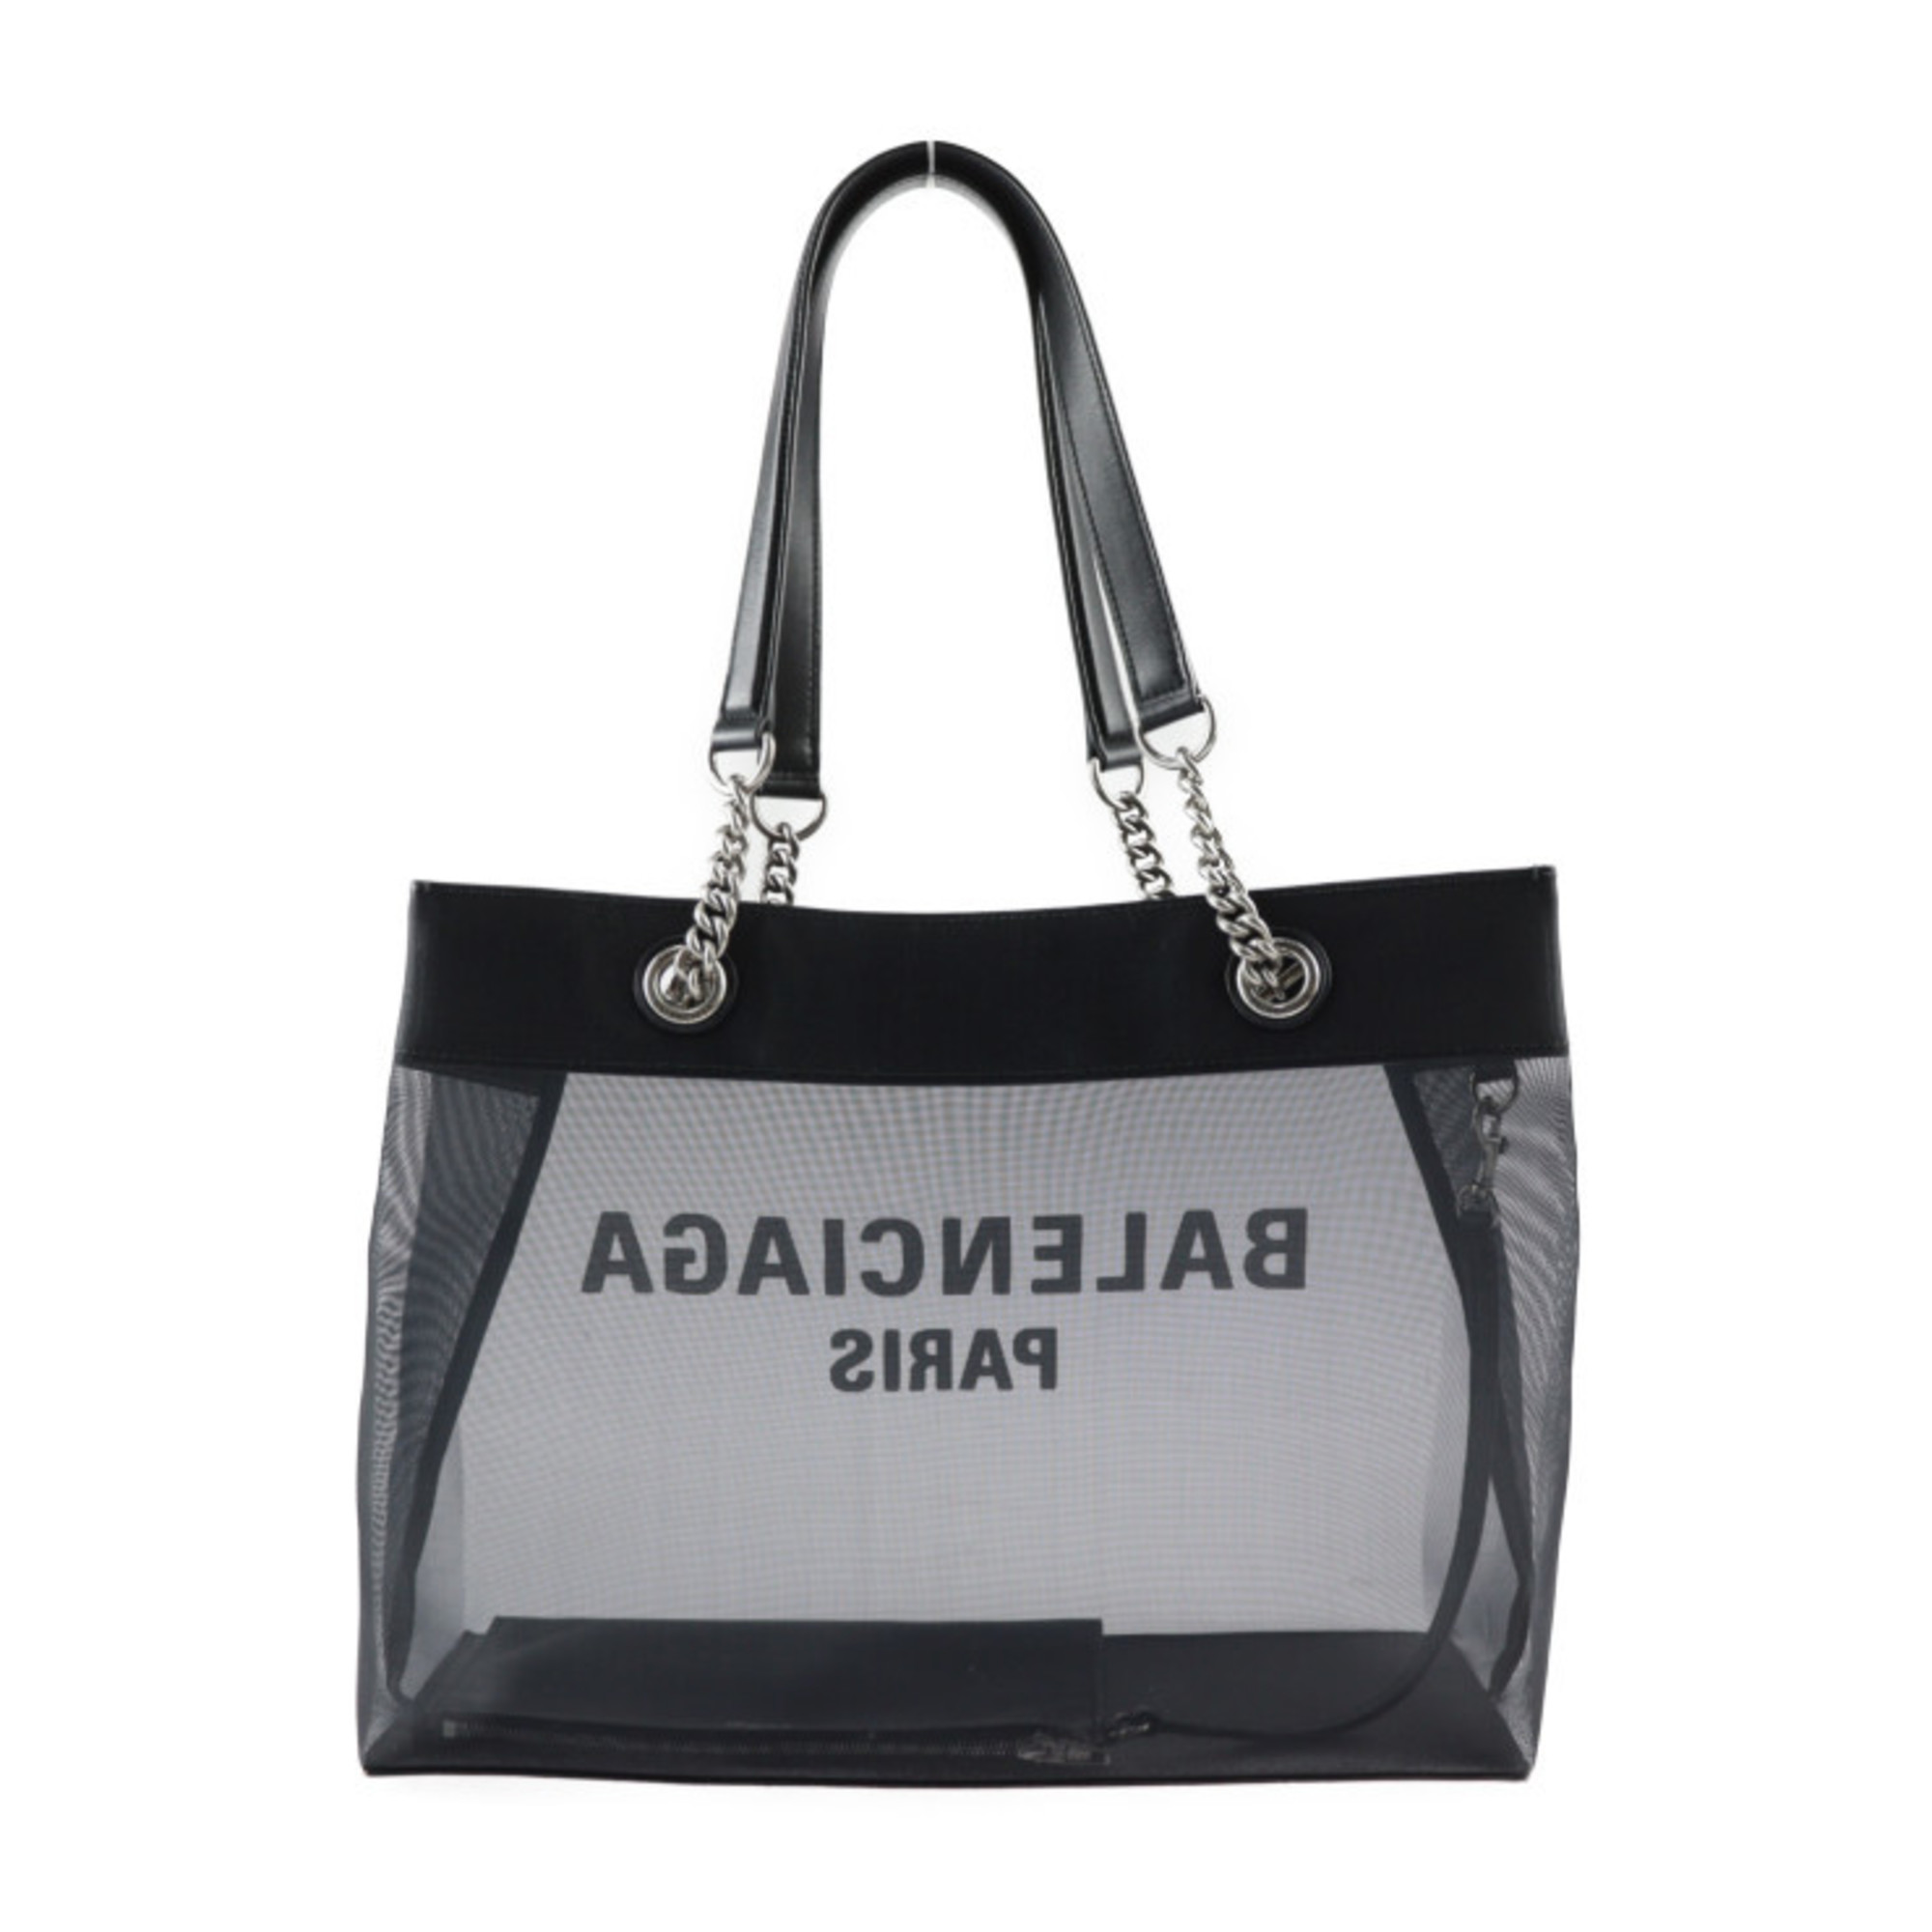 BALENCIAGA Duty Free Tote Bag 741602 Mesh x Leather Black Silver Hardware Shoulder Logo with Pouch